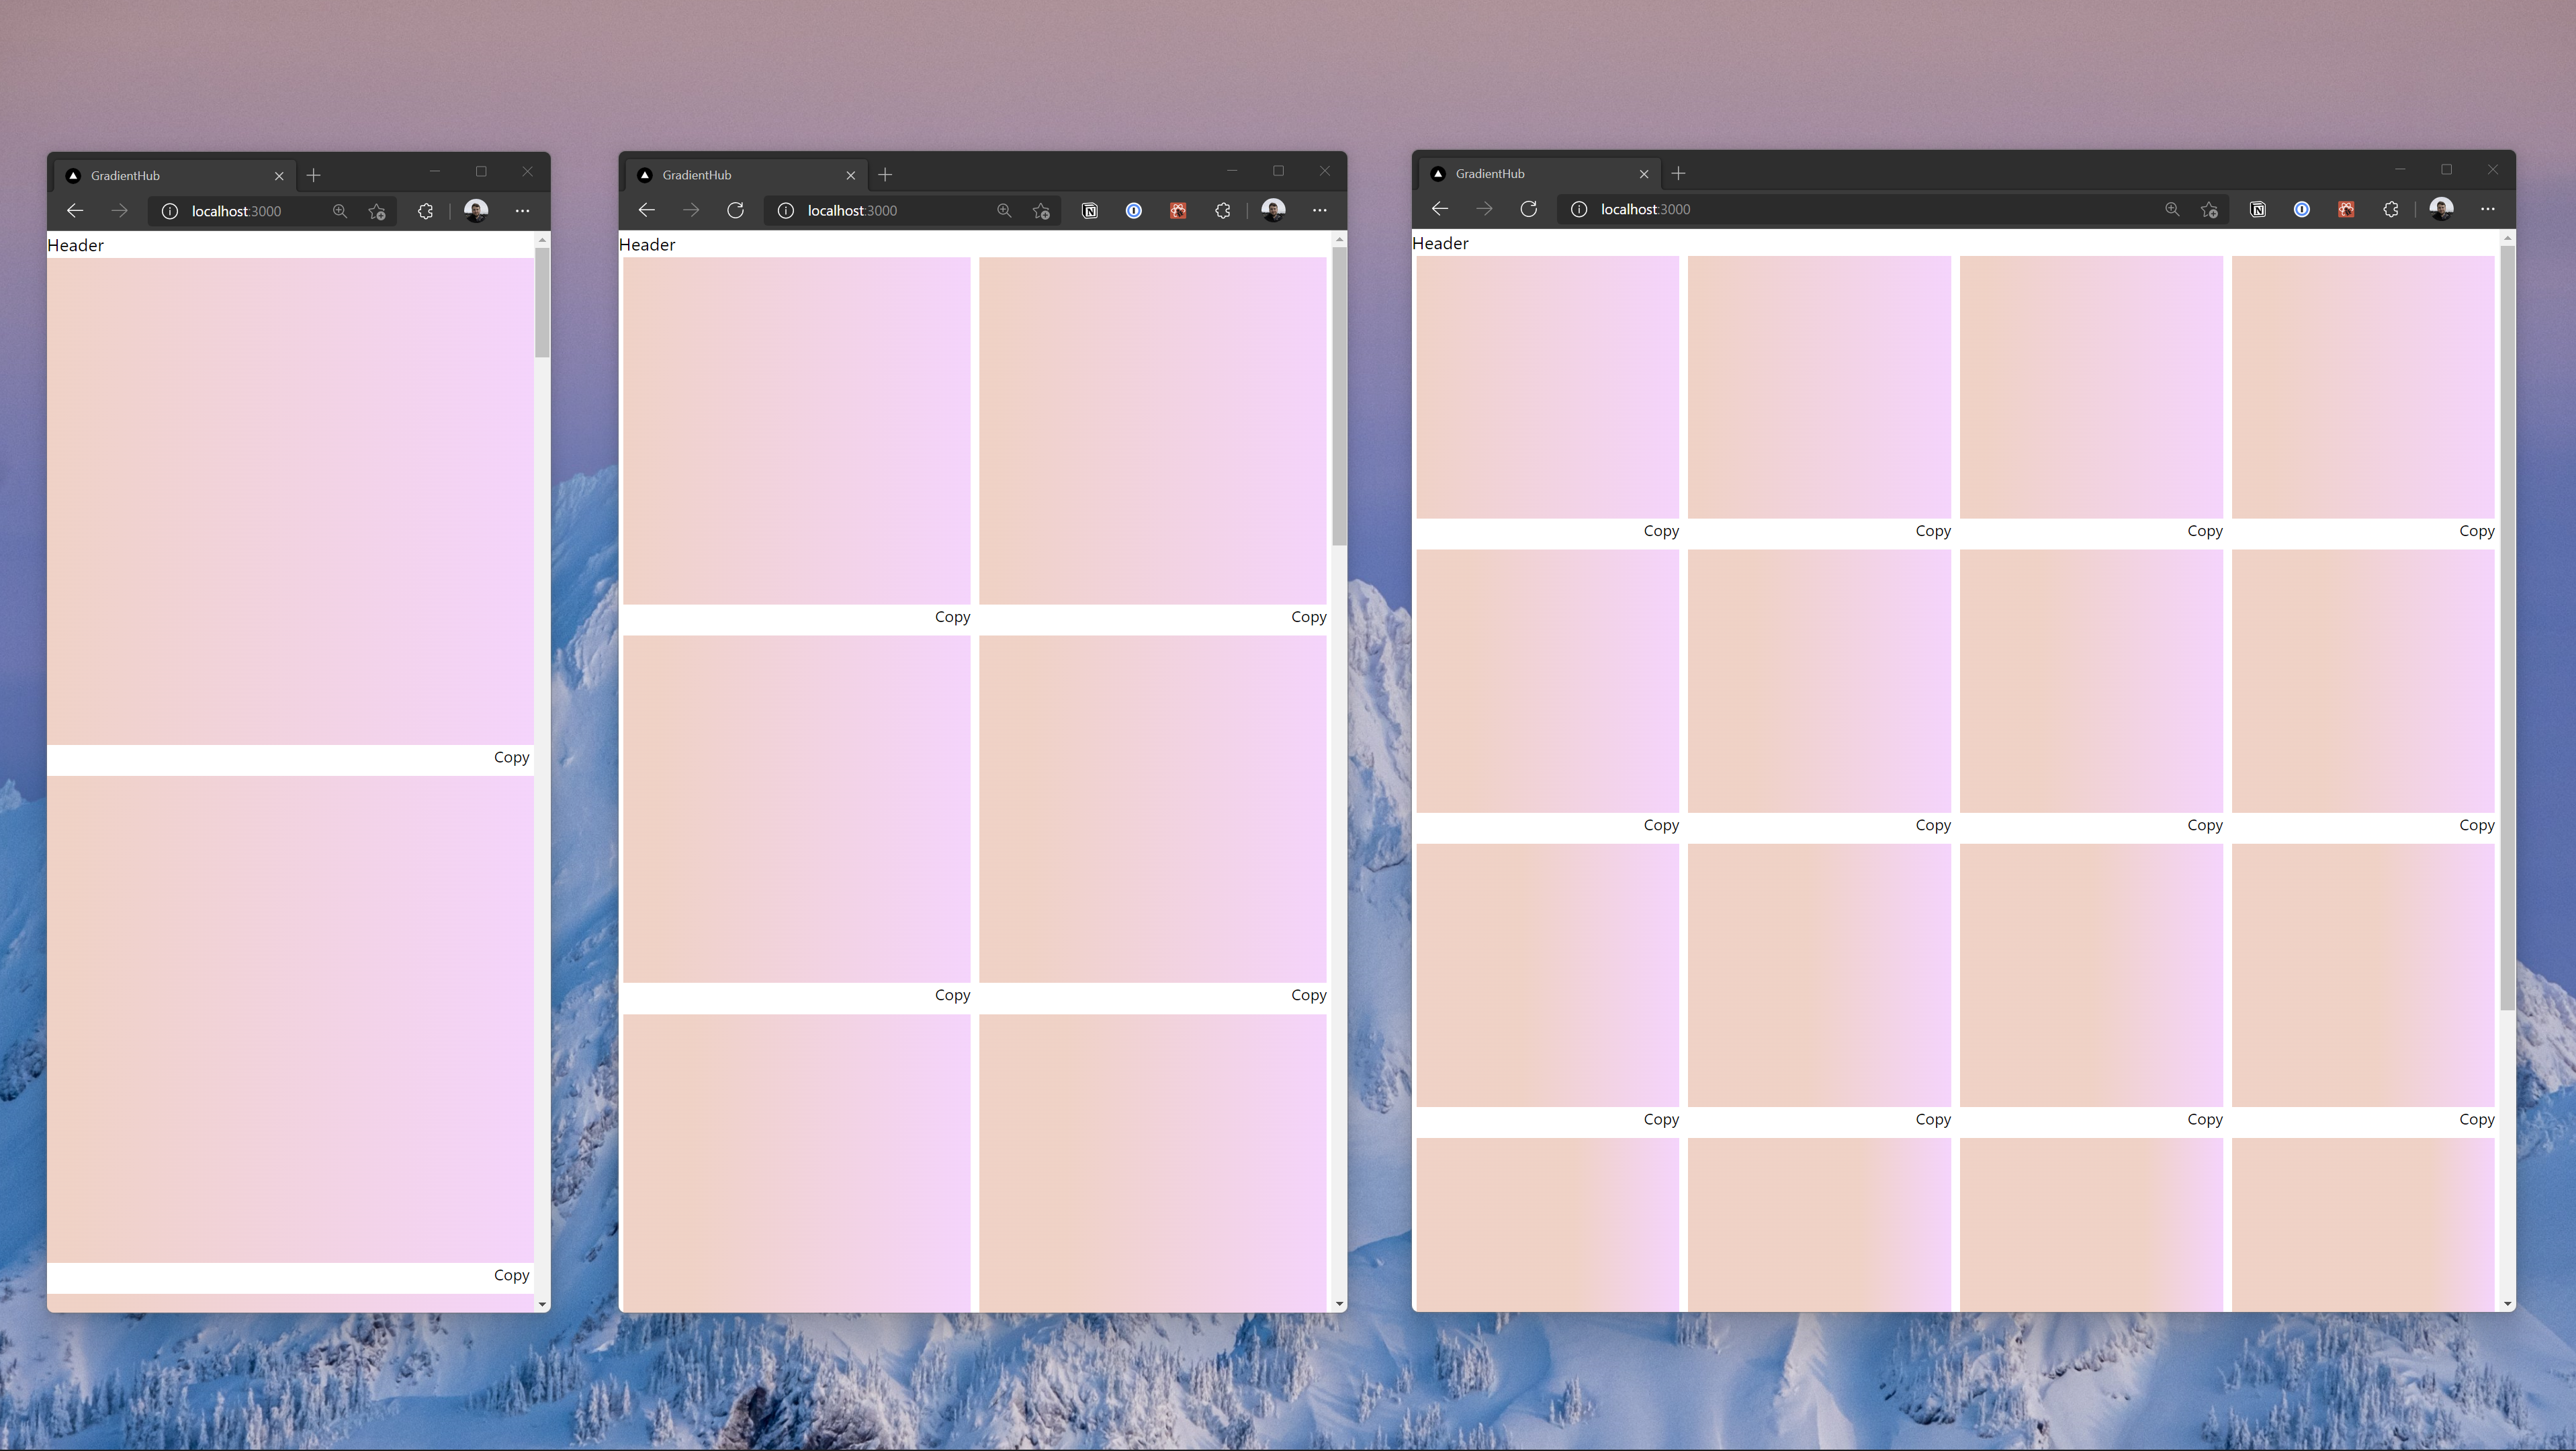 Three browsers of different sizes where the gradient preview scales from a single column to a grid.